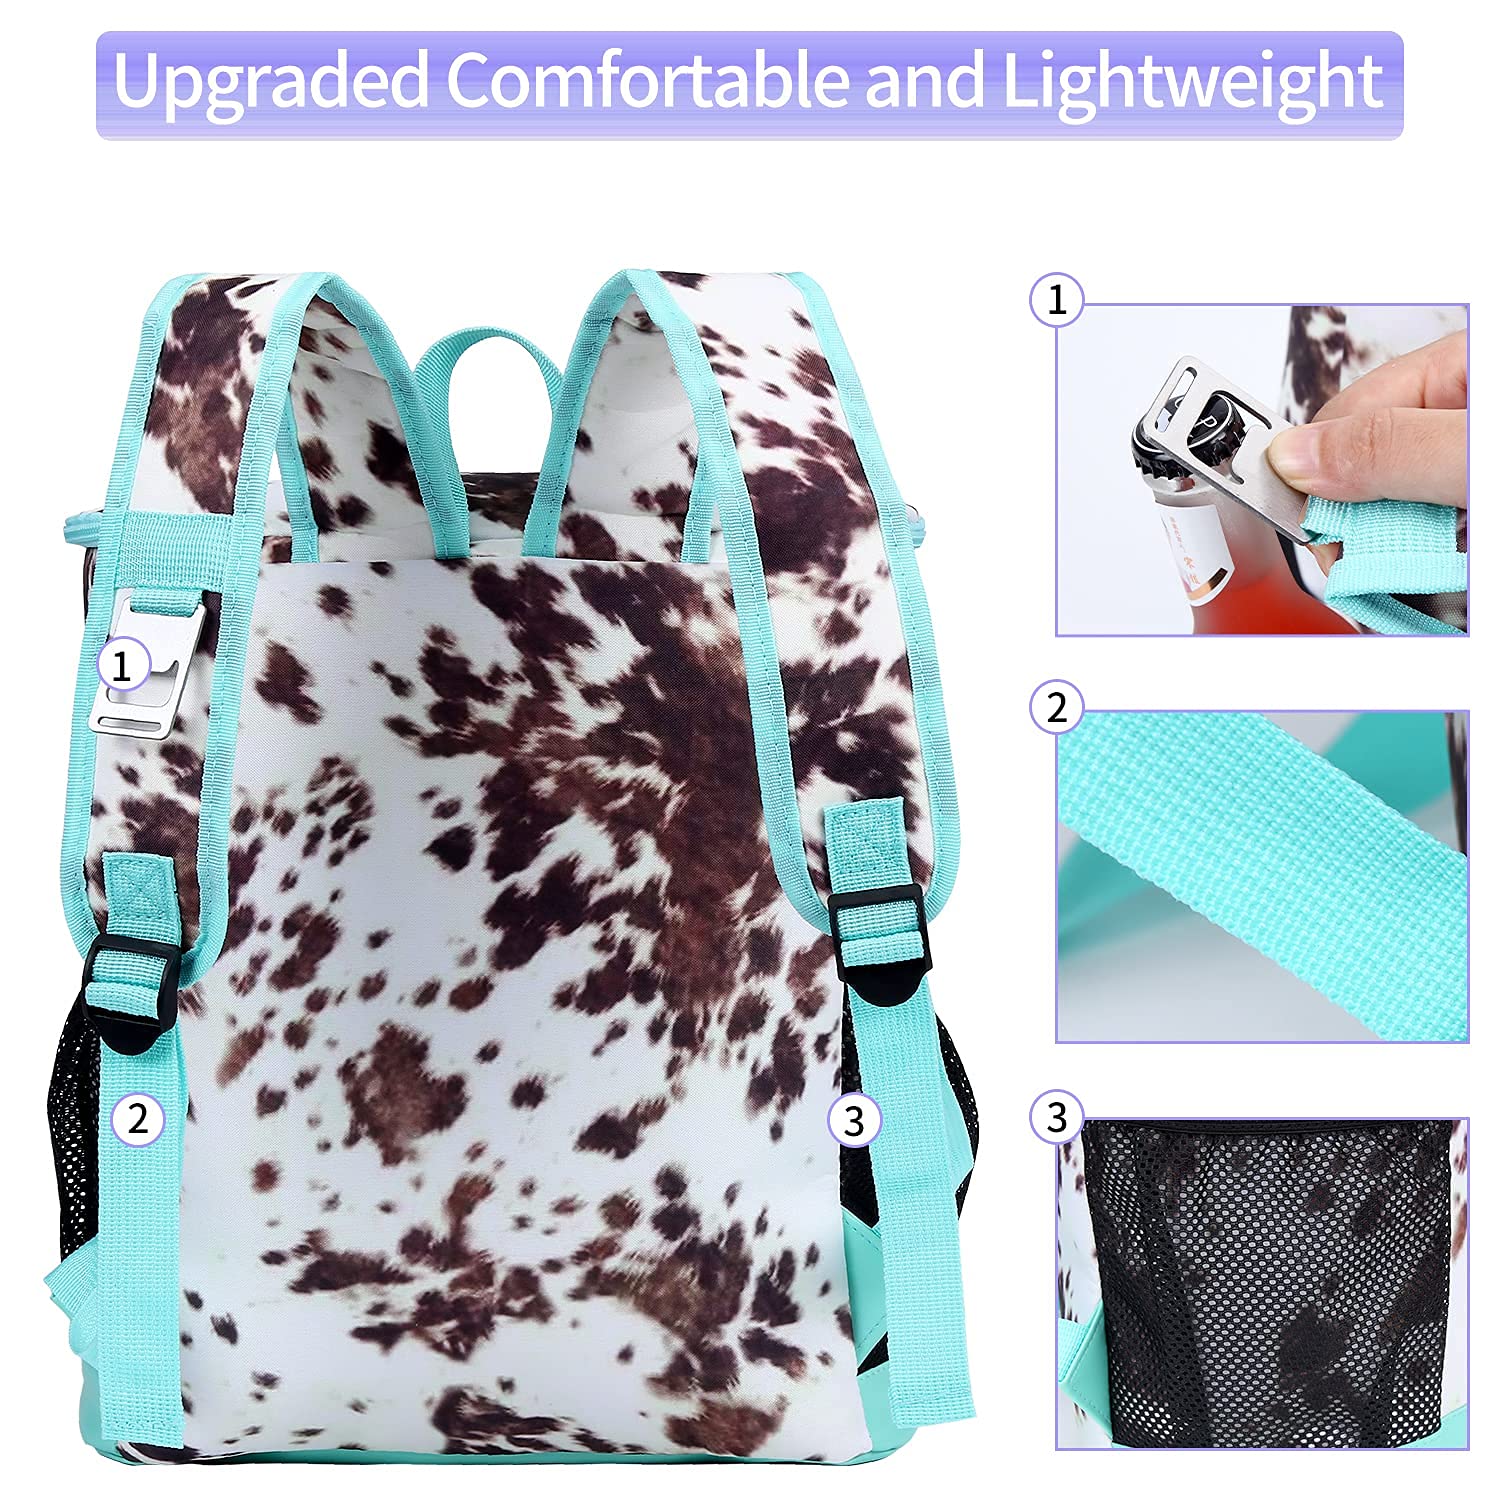 Leopard Cooler Bags Reusable Insulated Cooler Bags Large Portable Cooler Bag Lunch Box for Camping picnics, Lawn Party, Beach Vacations, Travel